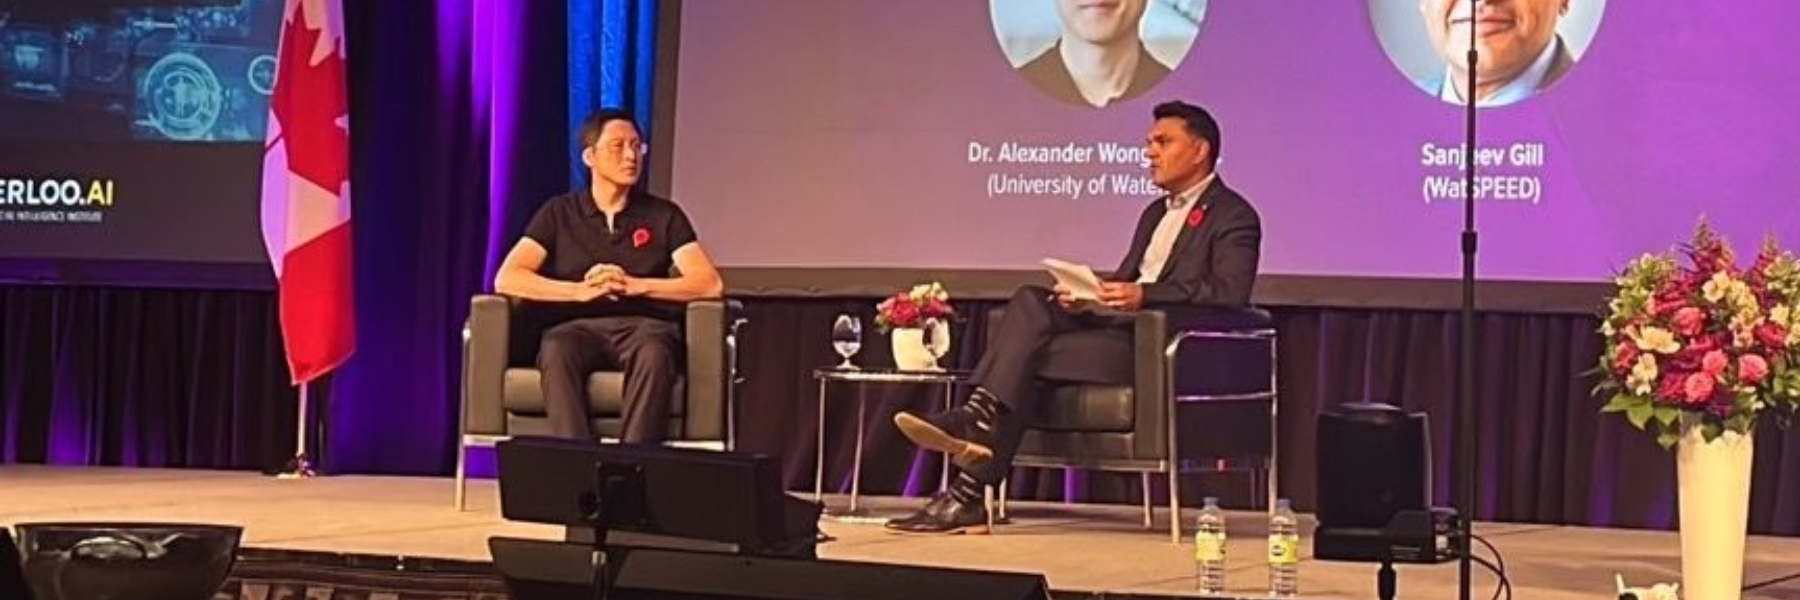 Dr. Alex Wong and Sanjeev Gill speaking at the 2023 Engineering Conference